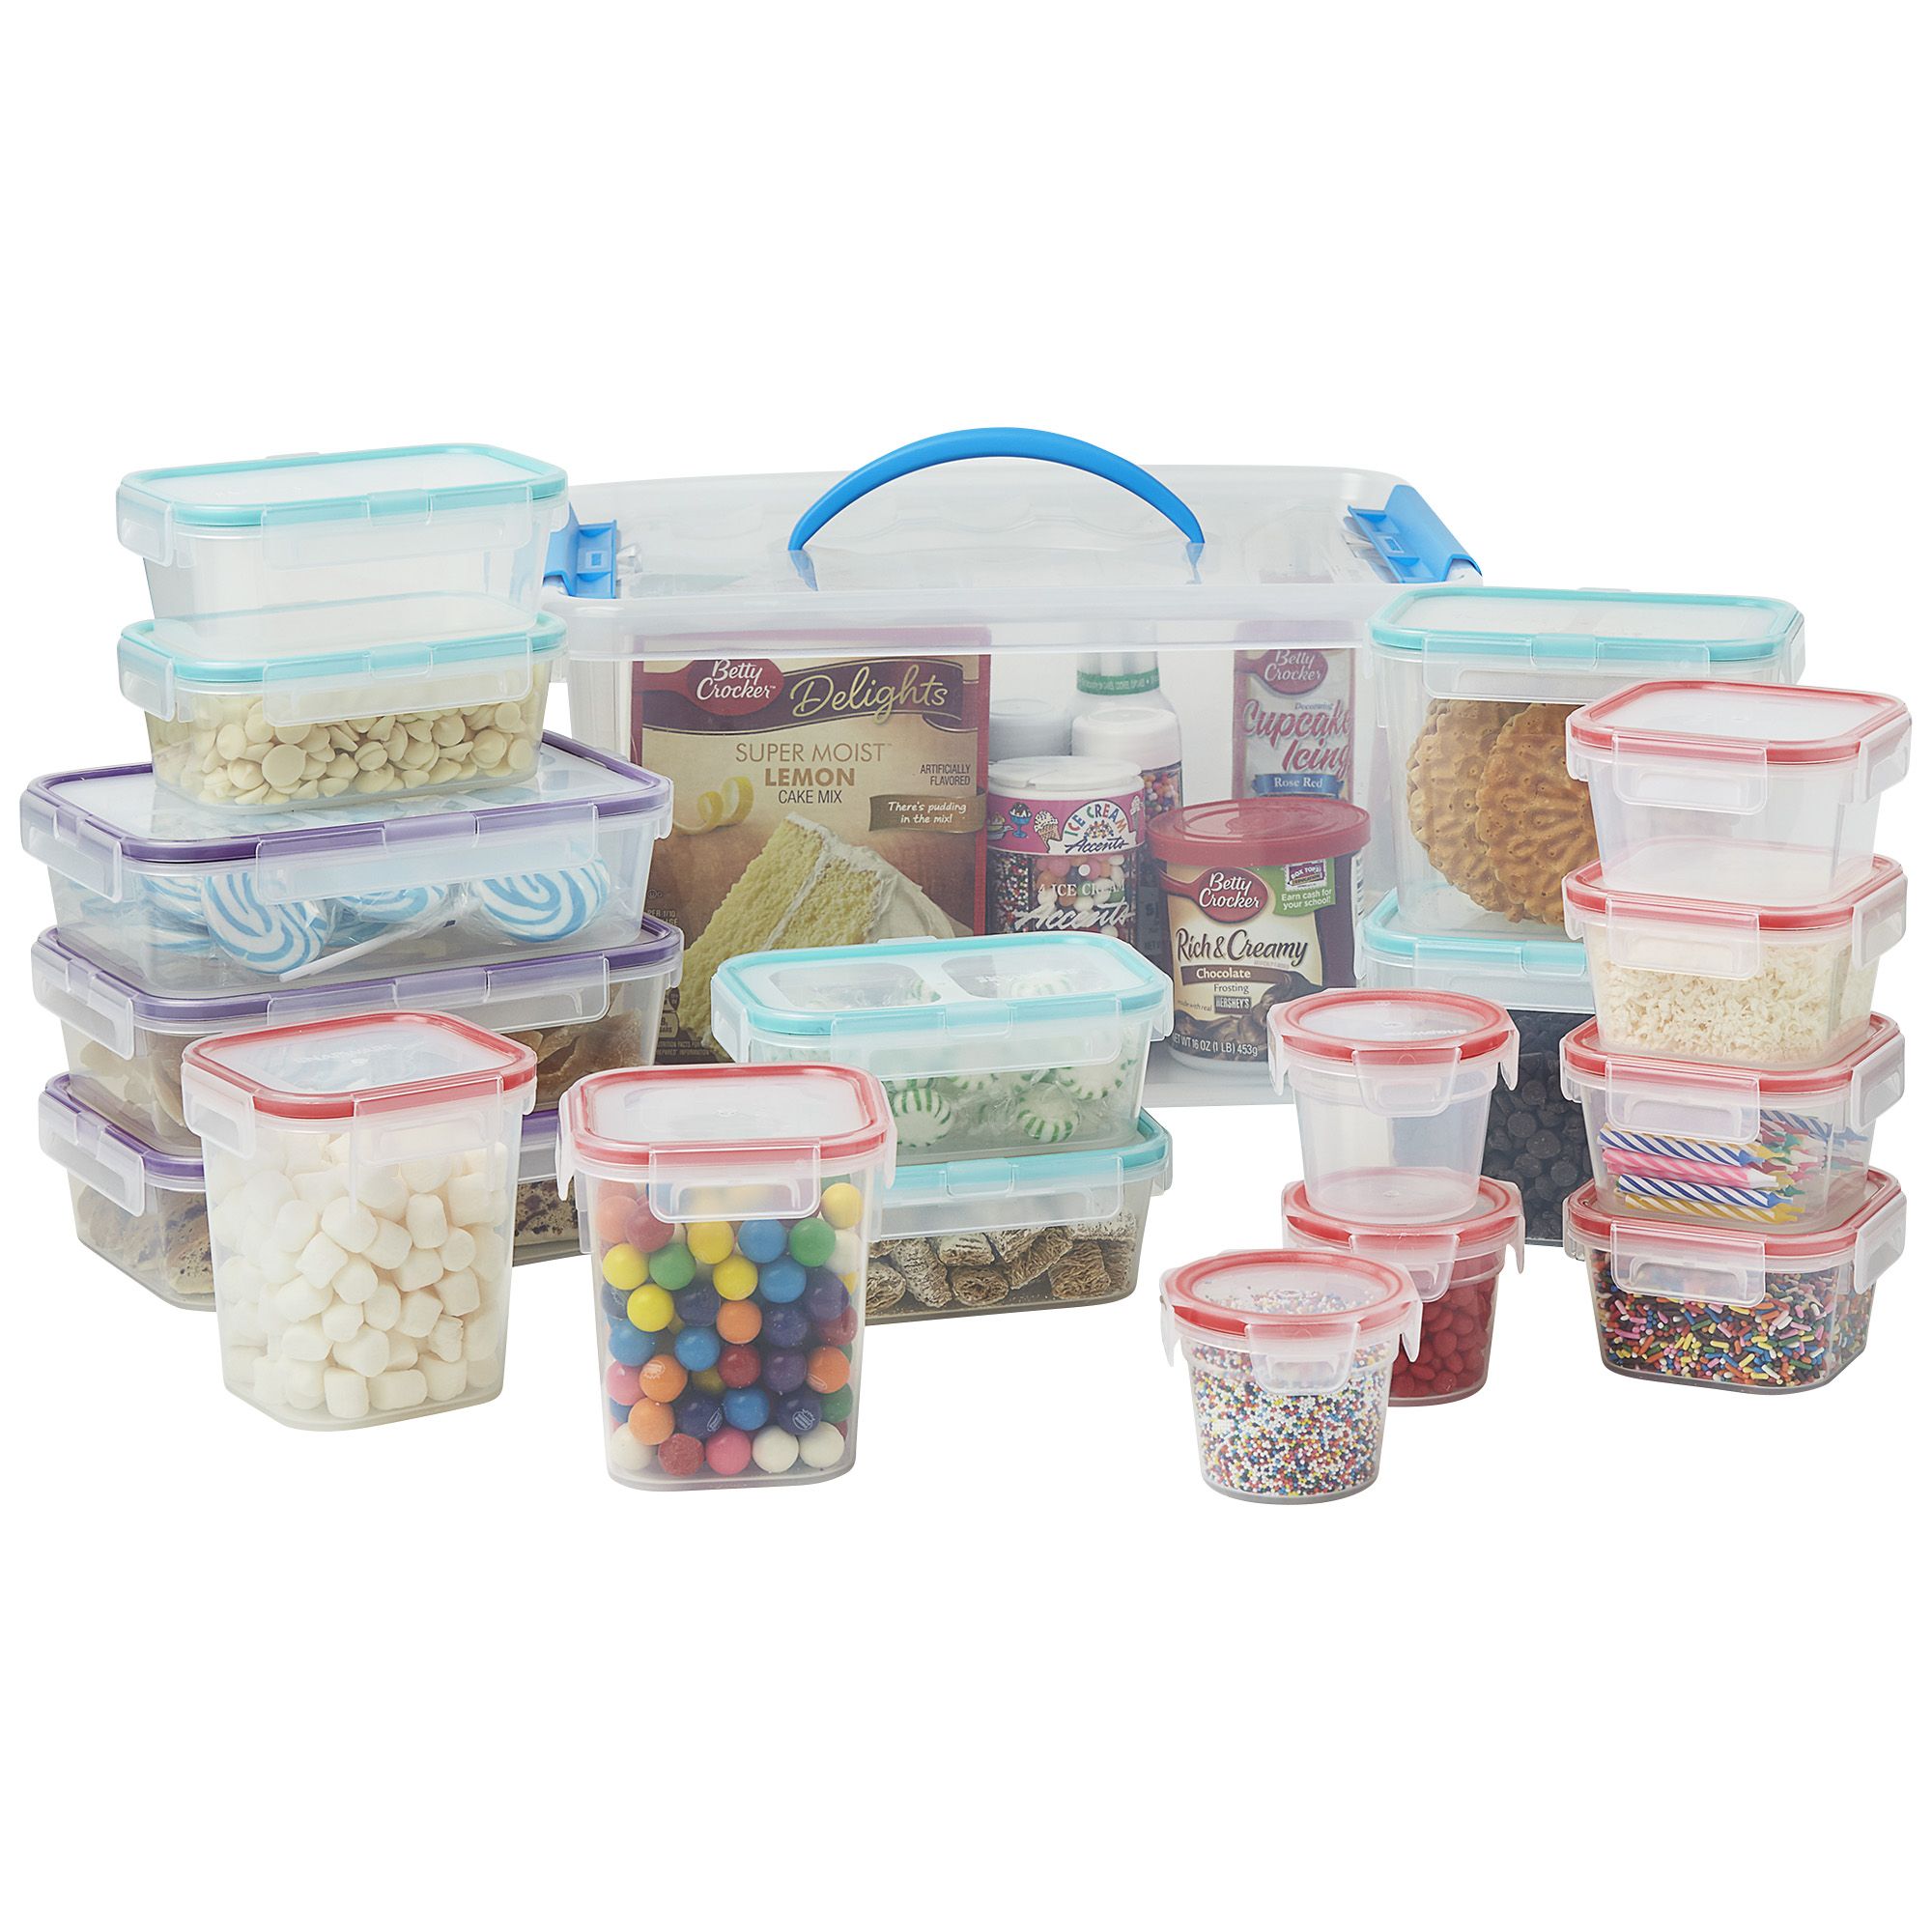 38 Piece Snapware Plastic Food Storage Container Set for Sale in